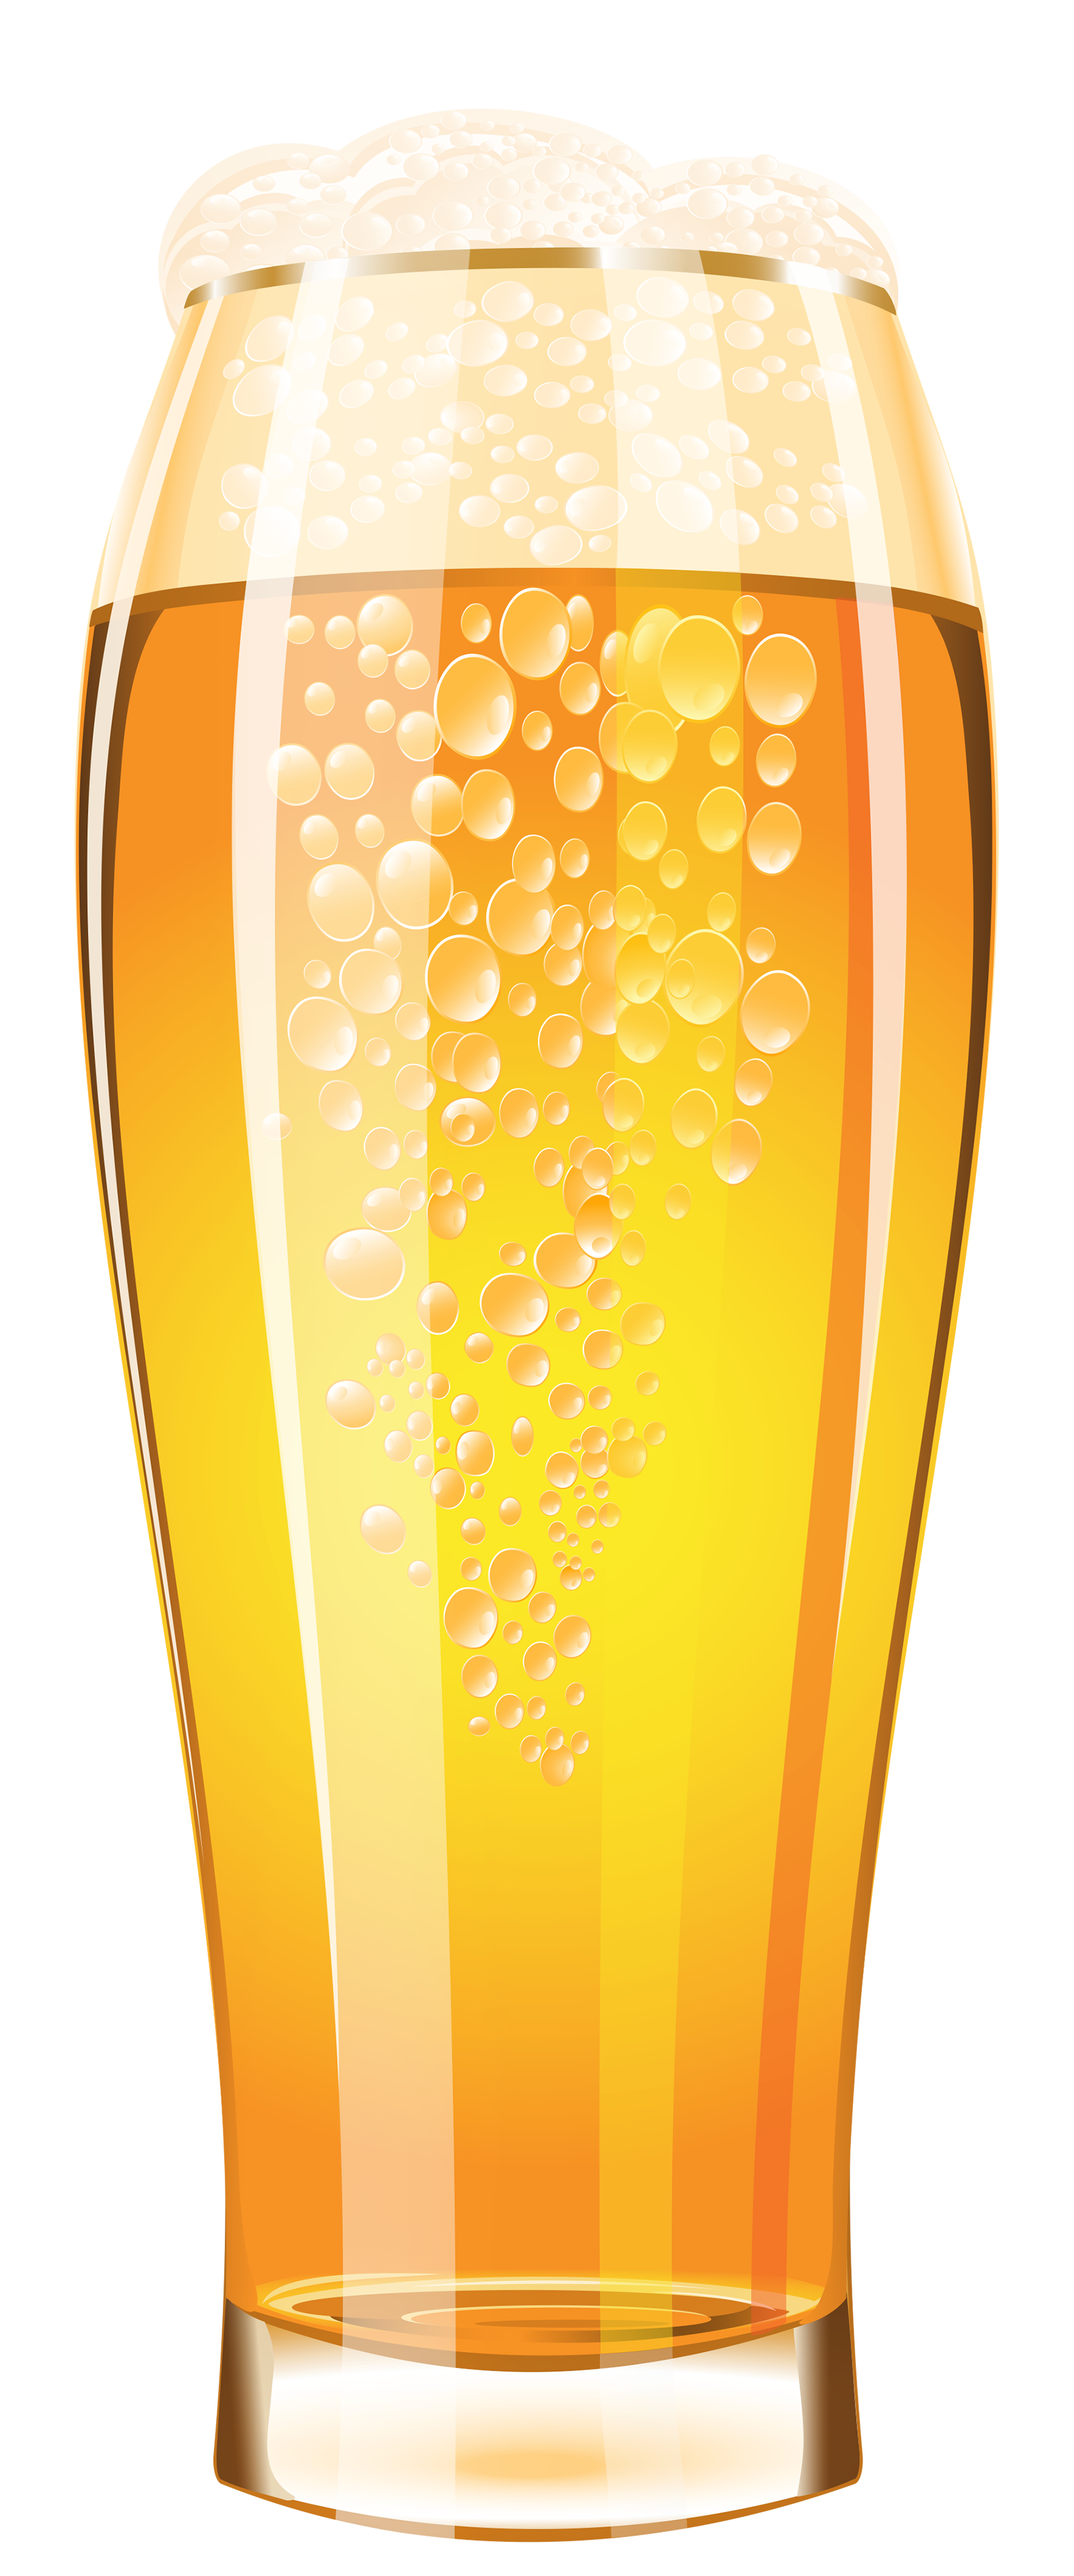 Glass of Beer PNG Vector Clipart Image | Gallery Yopriceville - High